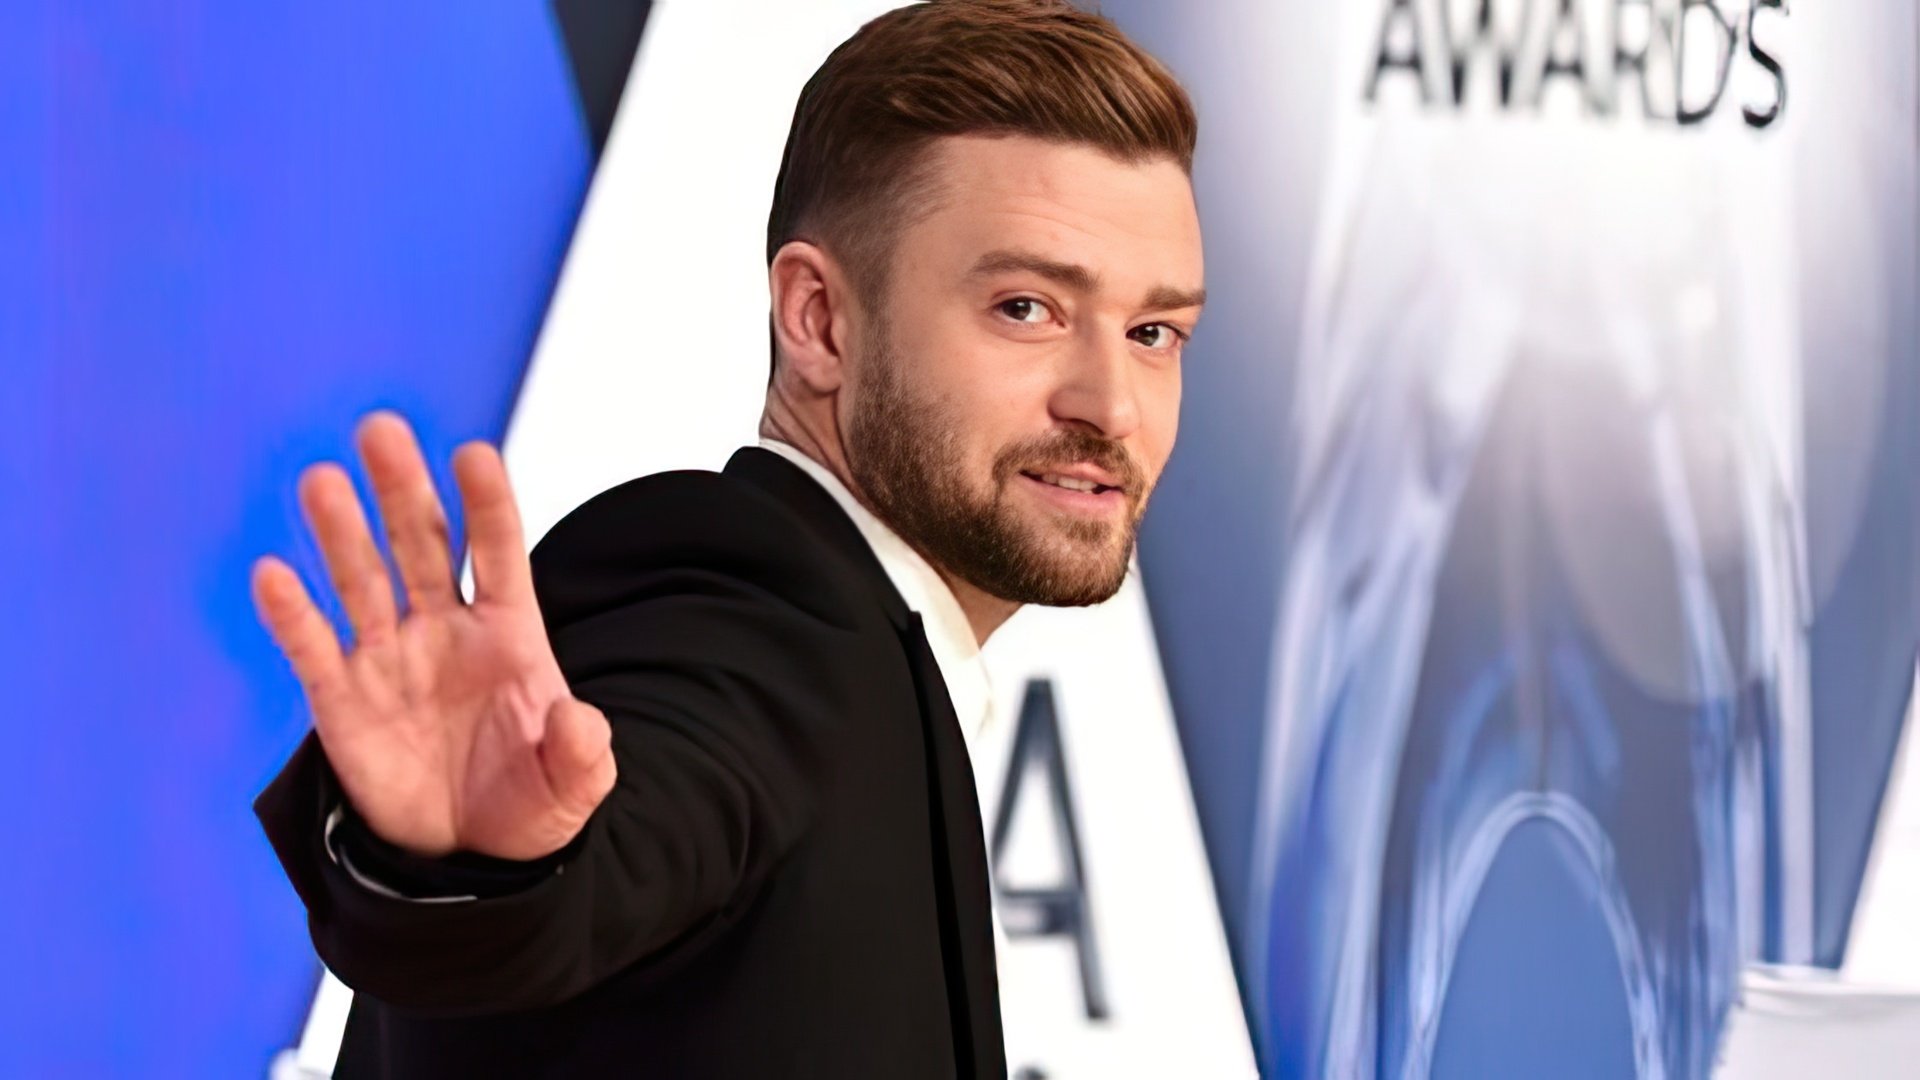 Justin Timberlake tried himself as an actor in the mid 2000s